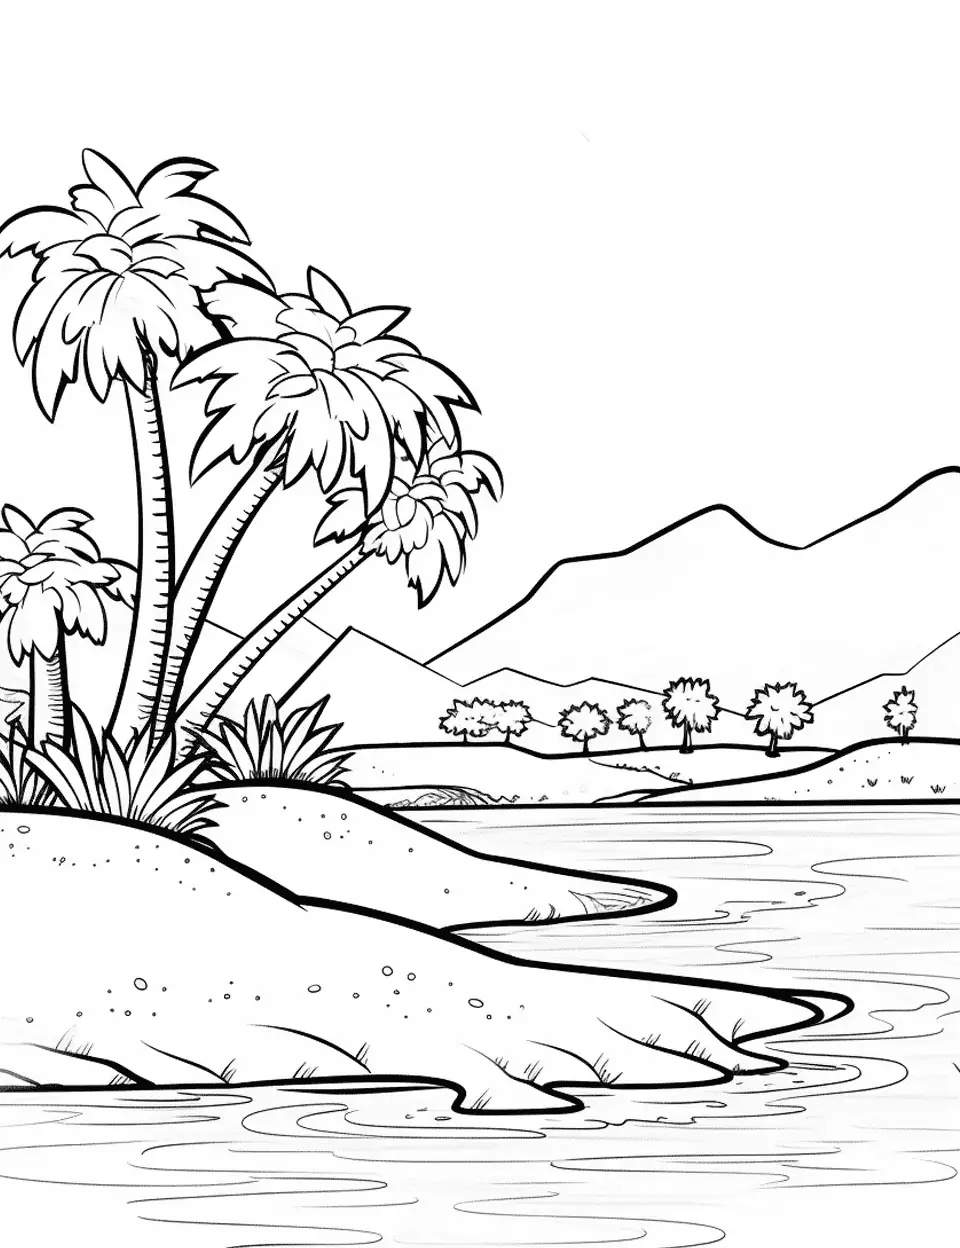 Tropical Island Paradise Nature Coloring Page - A small, uninhabited tropical island with a sandy beach and coconut trees.